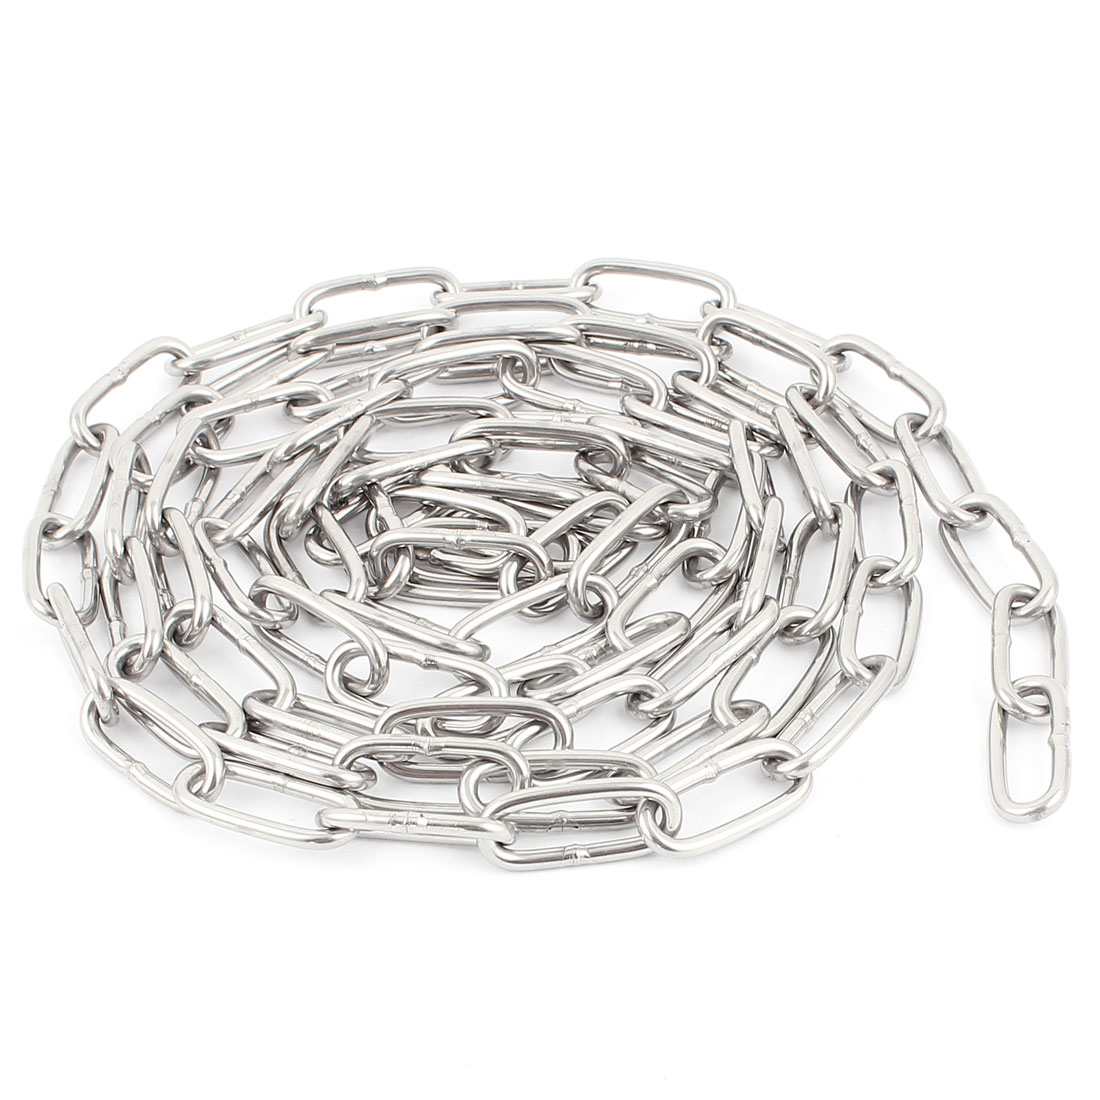 Unique Bargains 2 Meters Long 304 Stainless Steel Dog Tie Out Link Chain Silver Tone